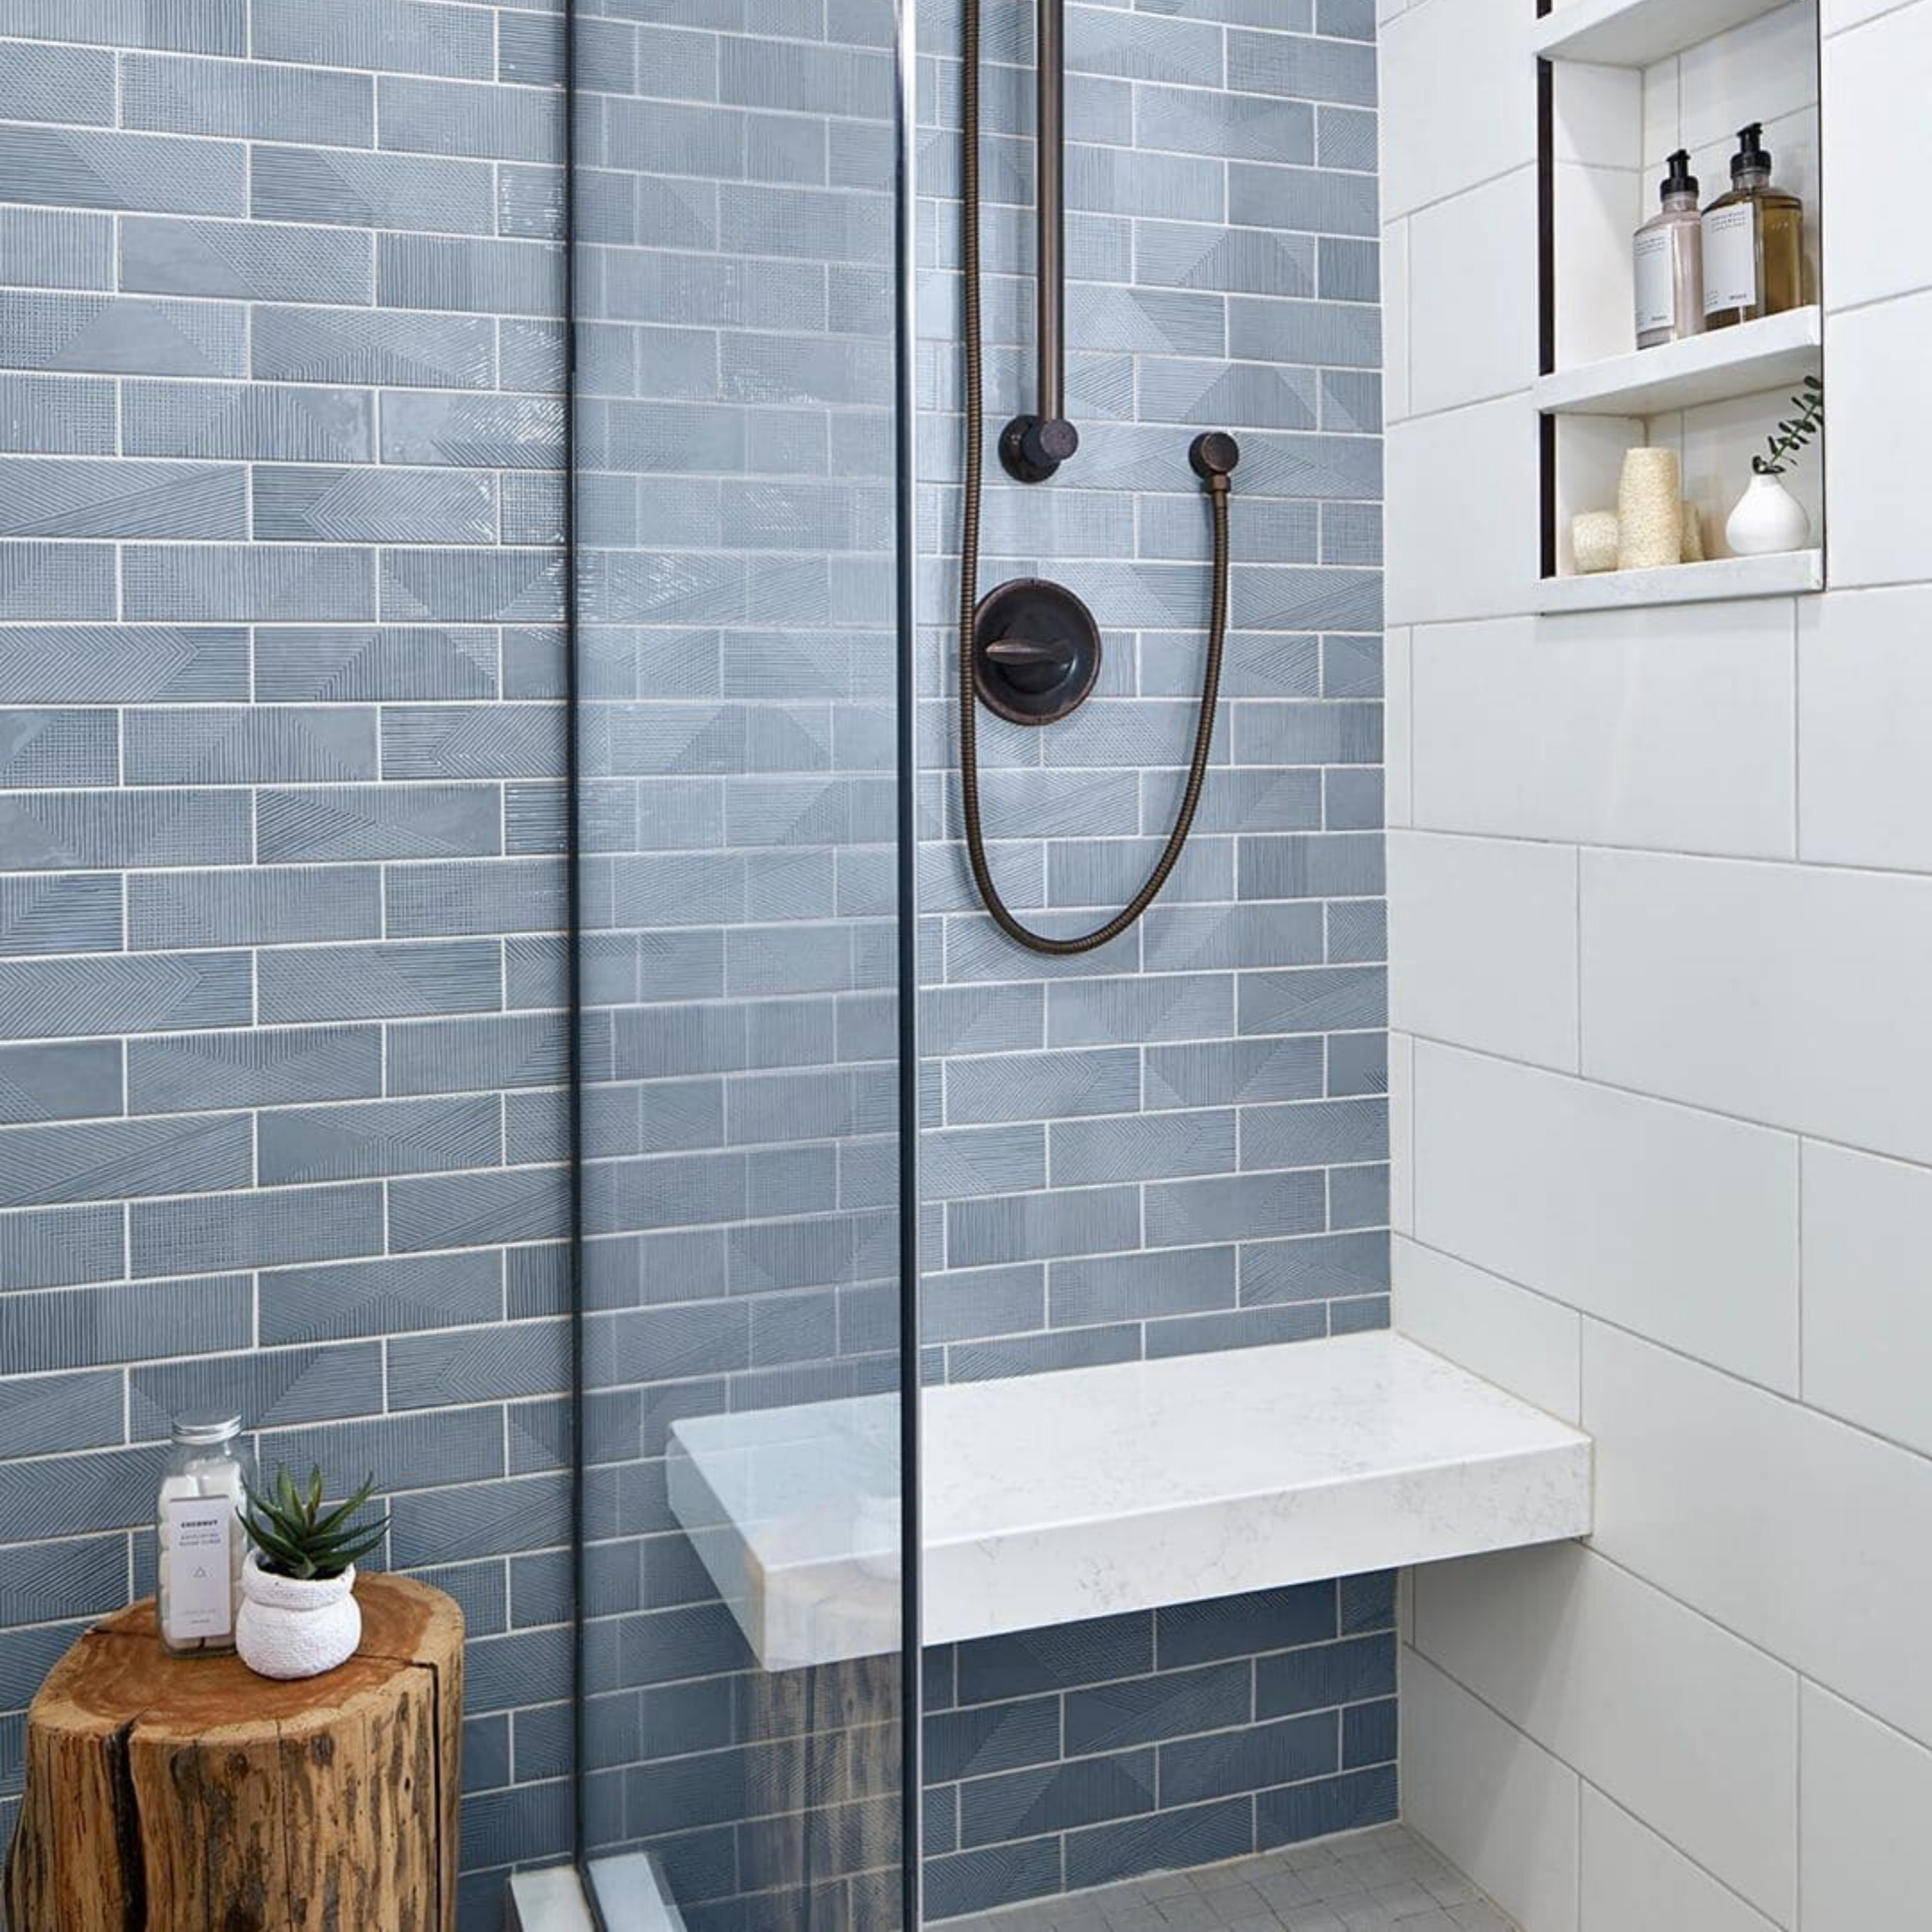 Enigma Ash Blue 2x8 Polished Ceramic Wall Tile. It's a textured tile used on the shower wall